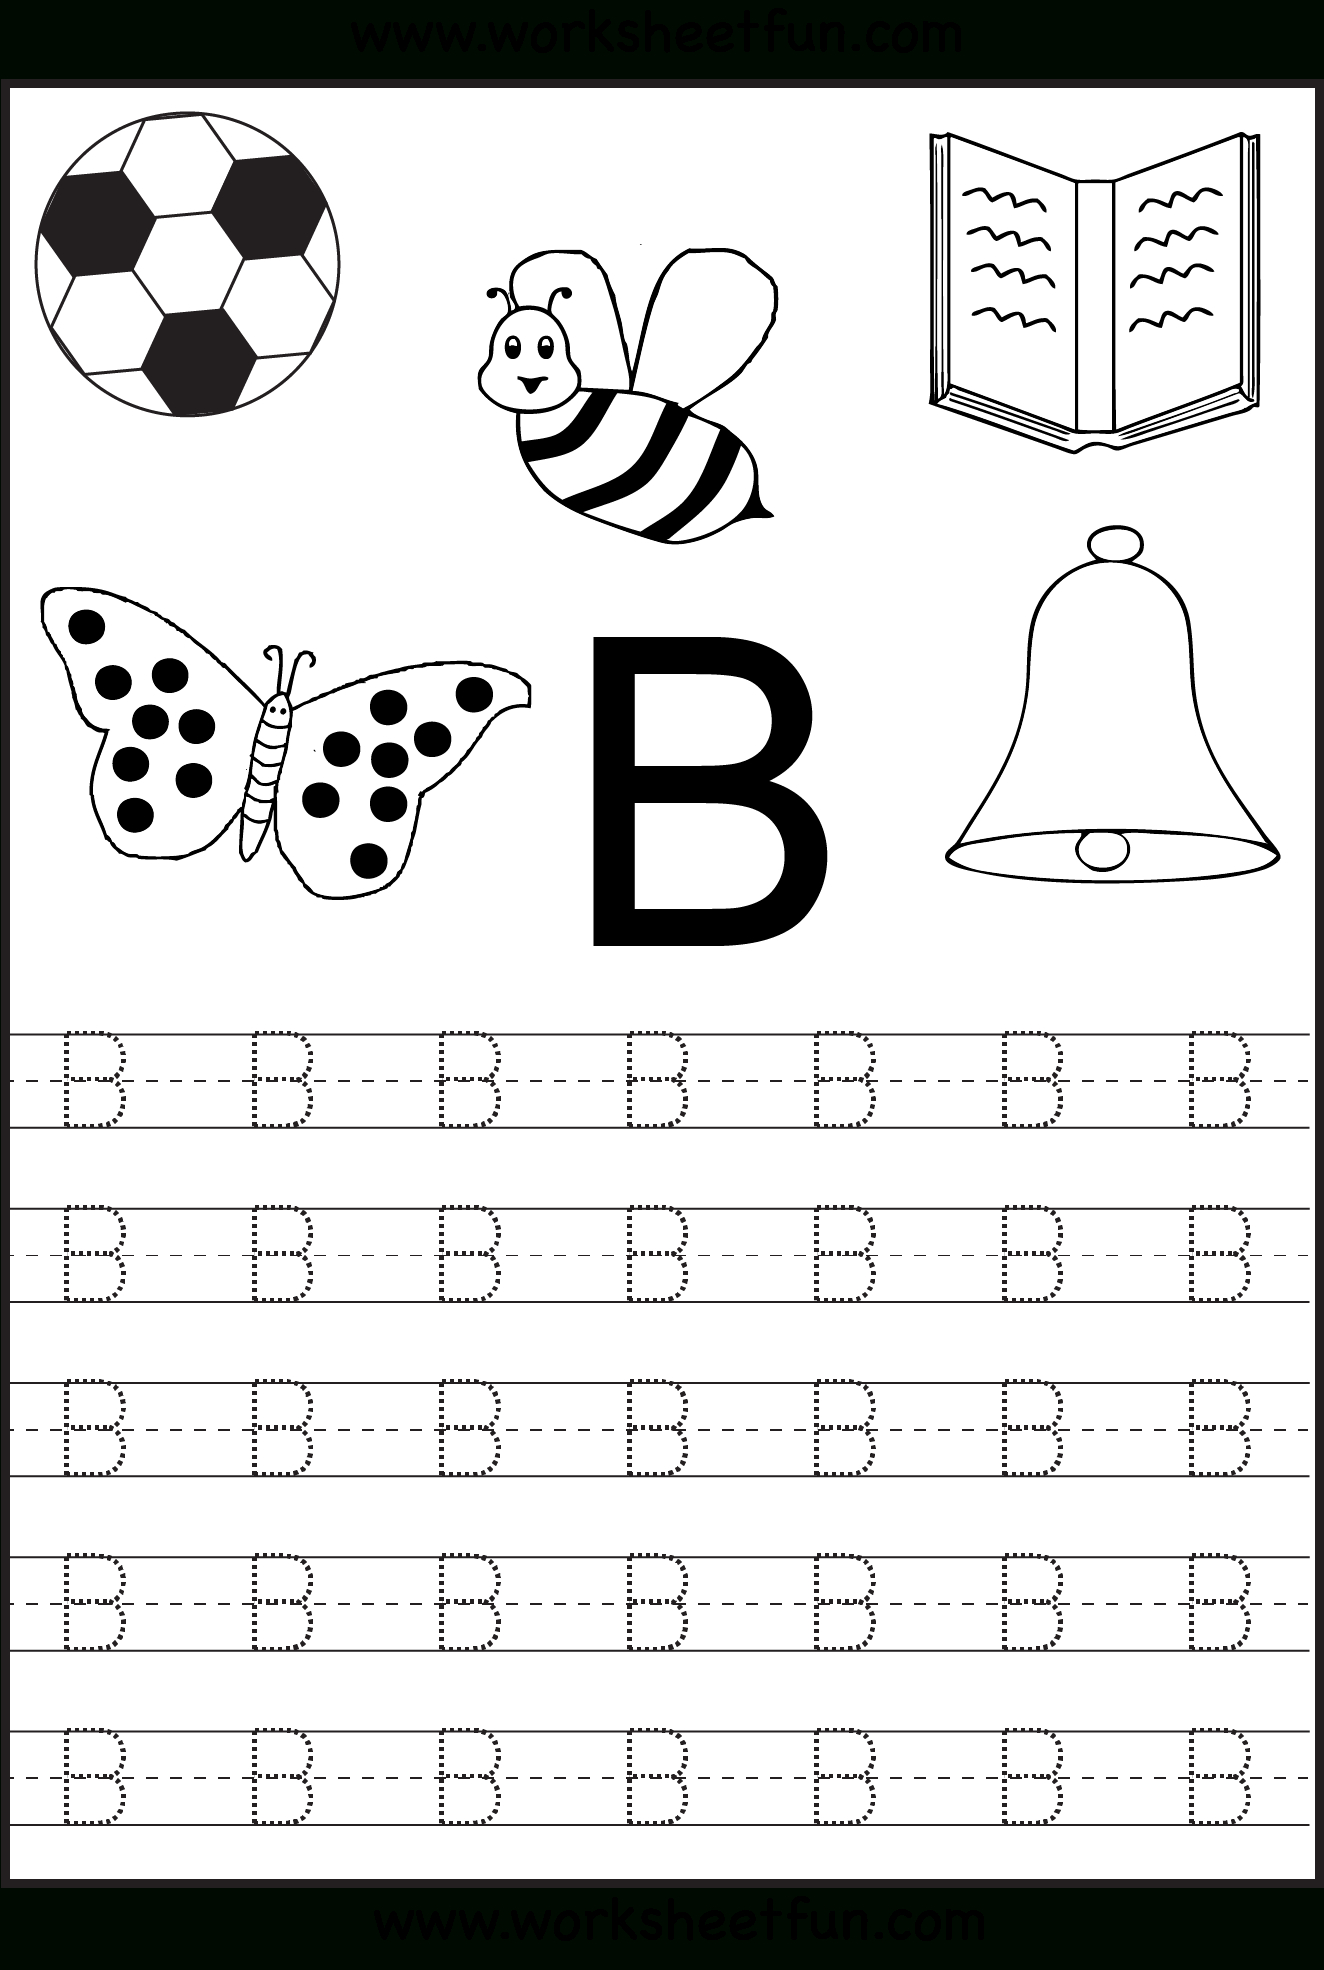 Free Printable Letter Tracing Worksheets For Kindergarten inside Letter Tracing Worksheets For Preschoolers Free